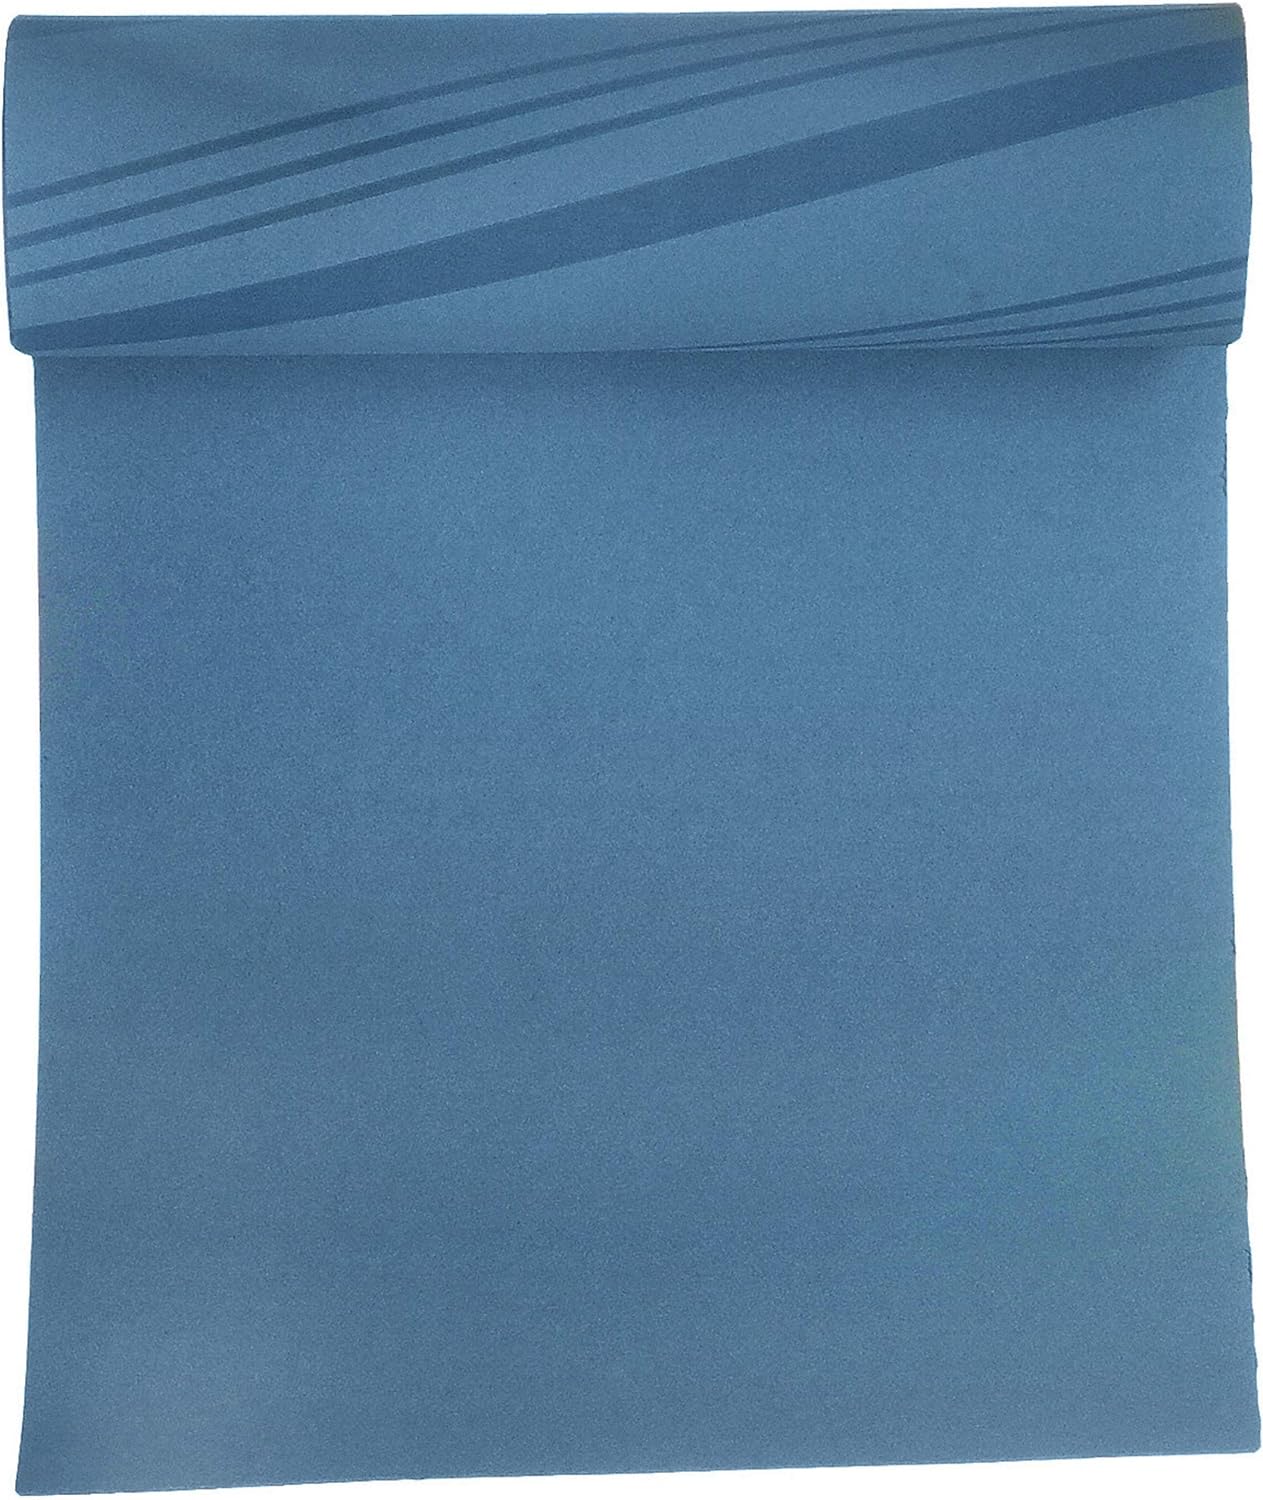 High Quality Rubber Gasket Material Sheet Blue Color - Paidu Suppliers